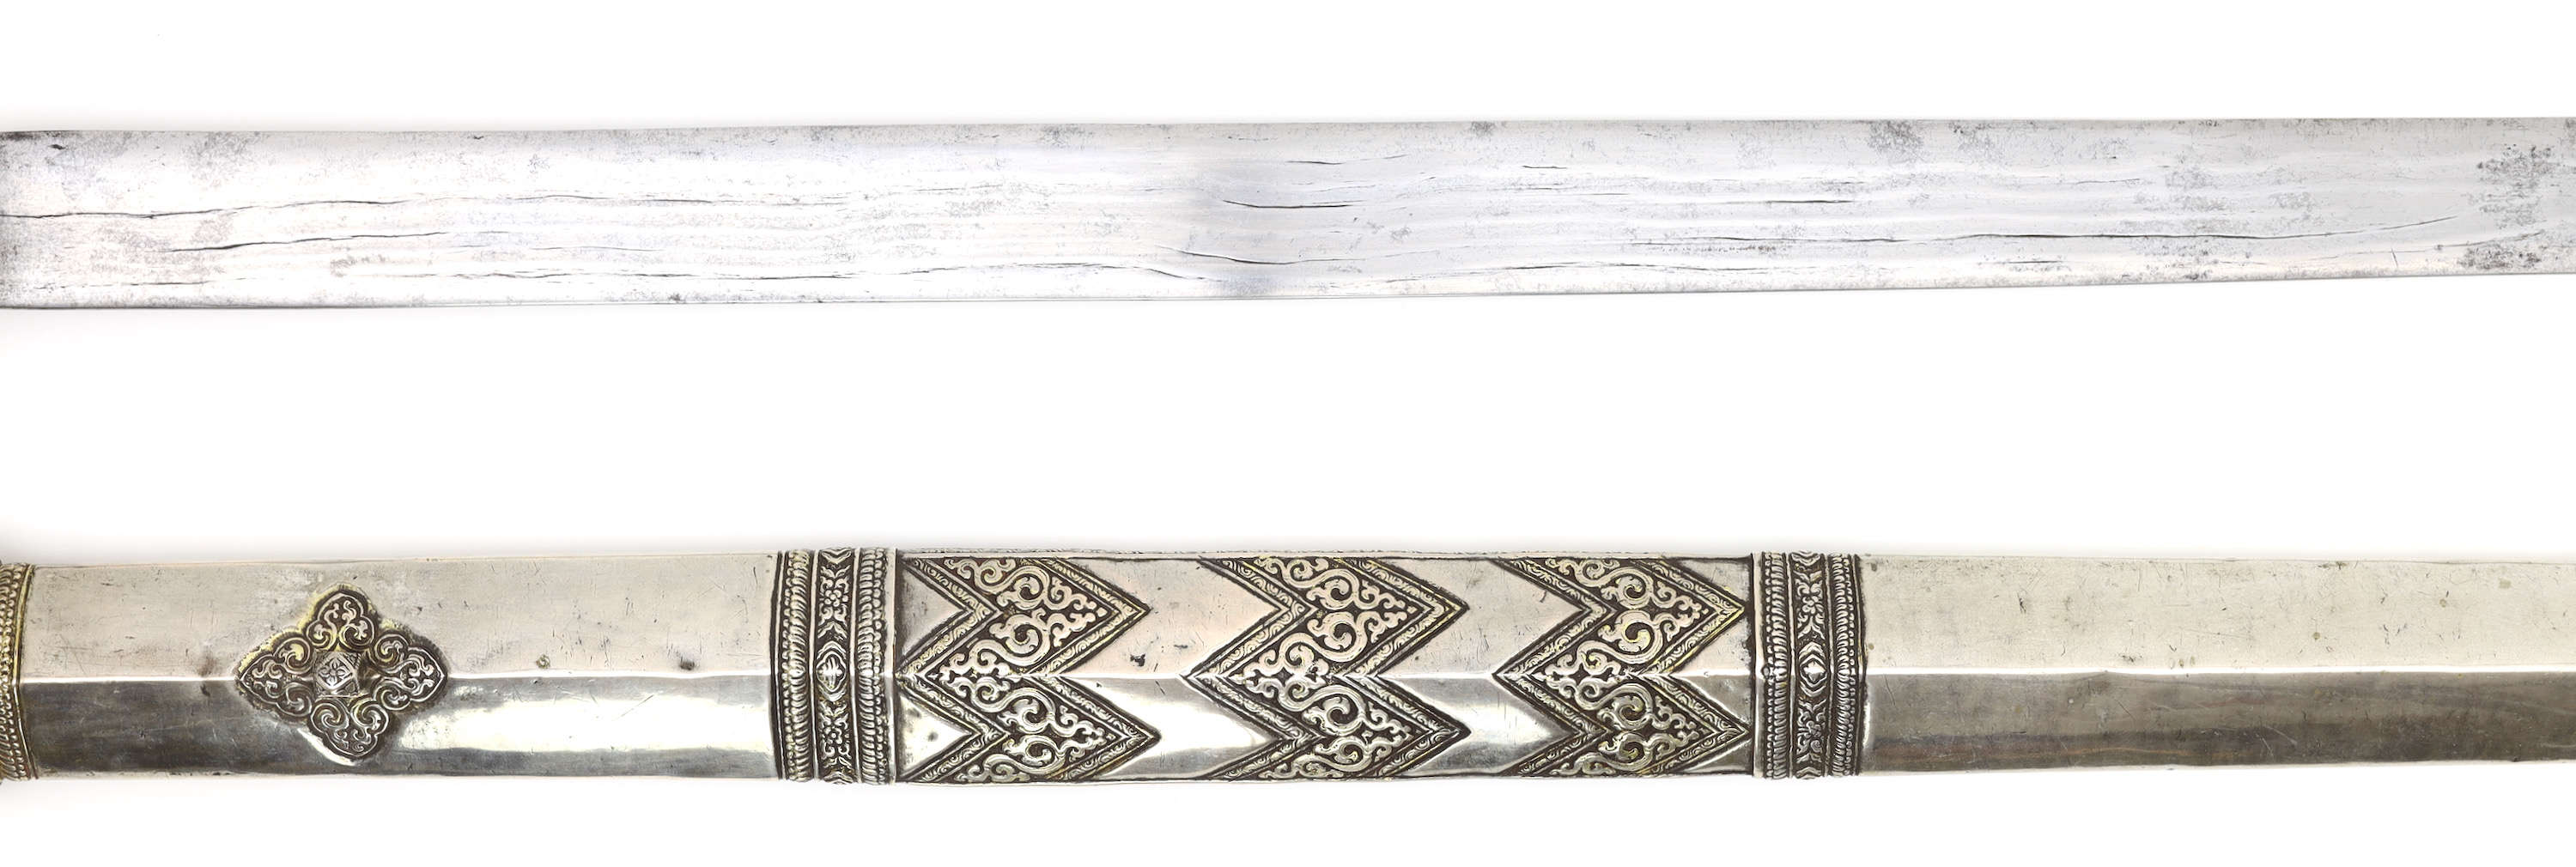 Bhutanese patag sword with silver scabbard